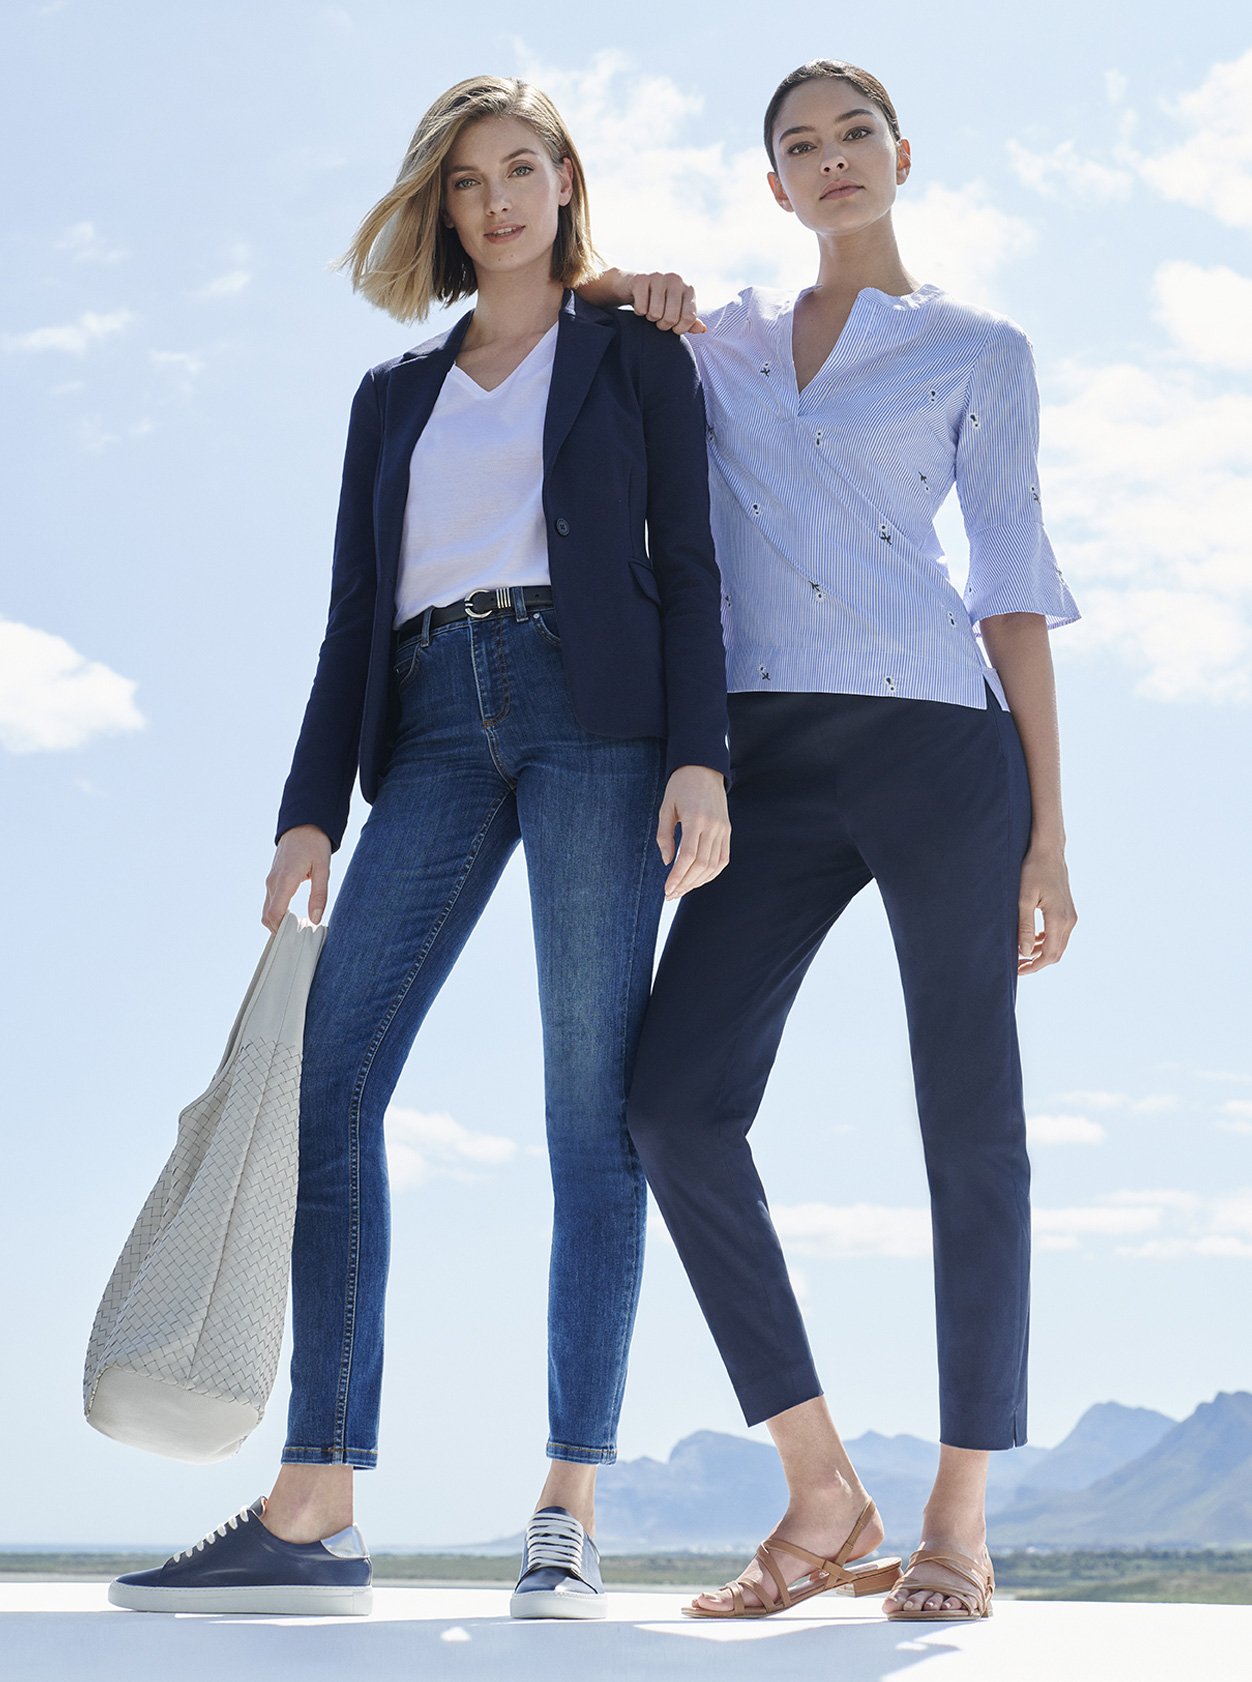 Outfit on the left features a women’s blazer in navy worn with a white t-shirt, a leather belt, blue slim fit jeans, a white leather tote bag and blue women’s trainers. Outfit on the right features a pale blue blouse with blue chinos for women and tan sandals, by Hobbs.